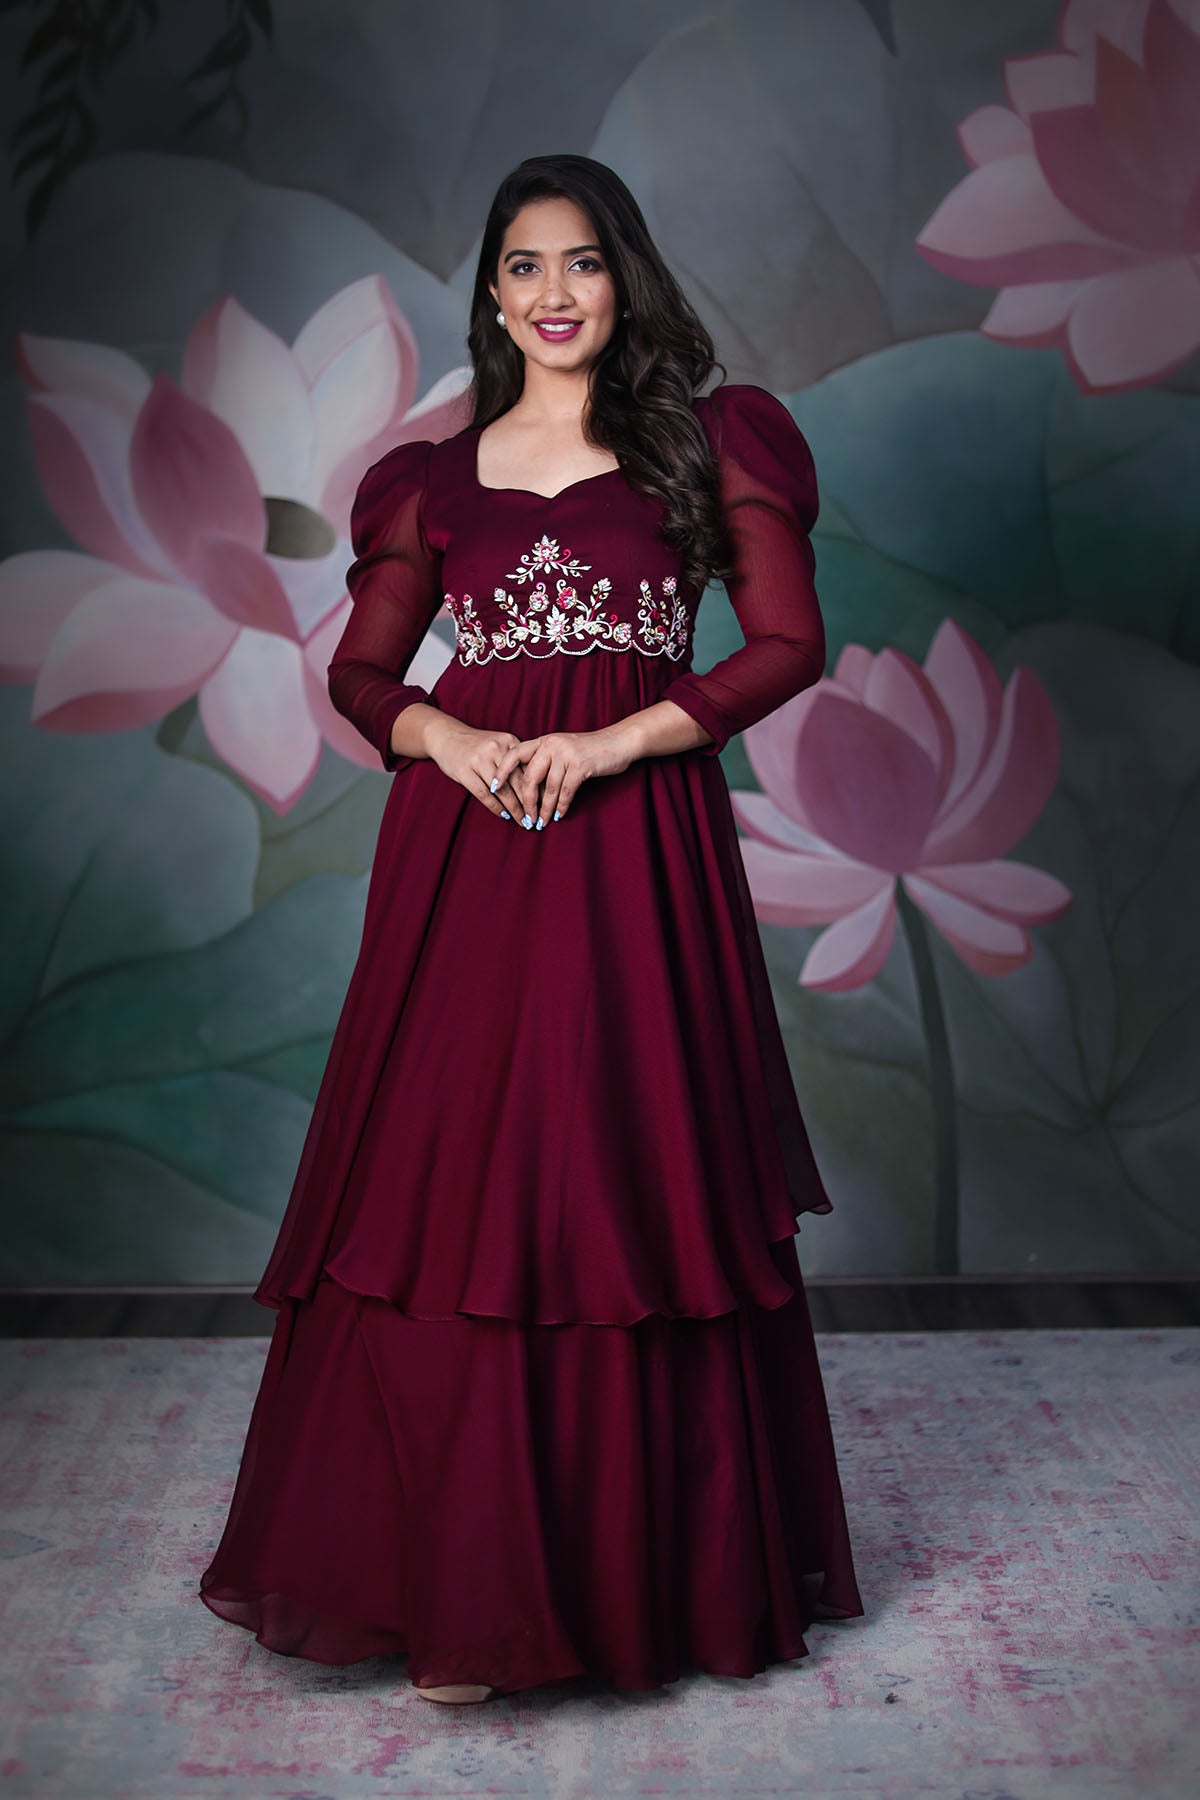 Bulliont Knot - Traditional Party Wear Long Dresses